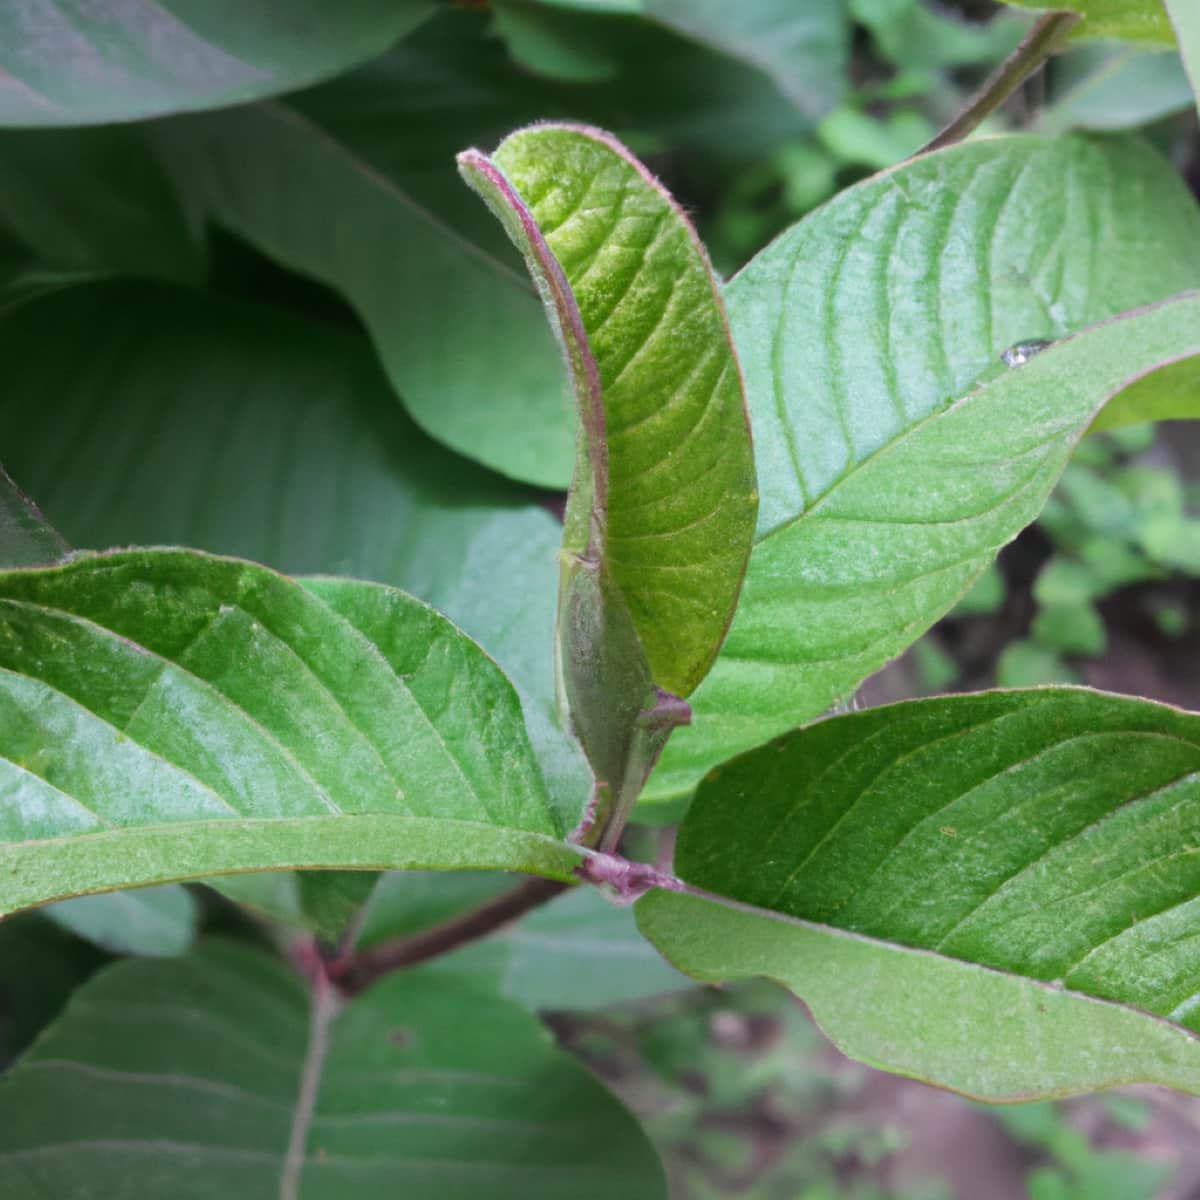 How to Control Guava Pests Naturally